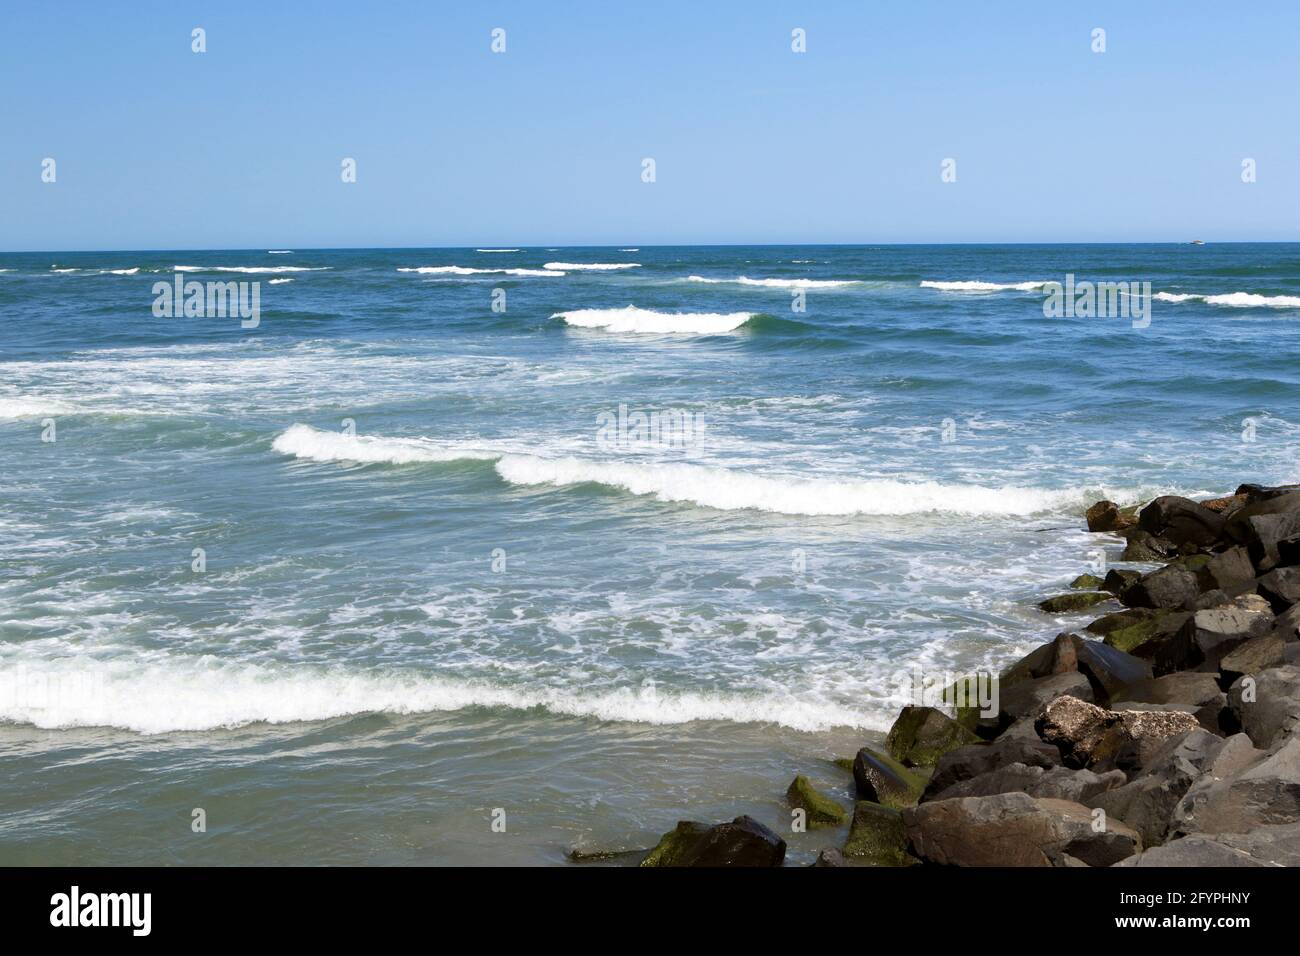 A jetty in North Wildwood, New Jersey where the Atlantic Ocean and the Hereford Inlet meet. The waters are dangerous as are many inlet waters. Stock Photo